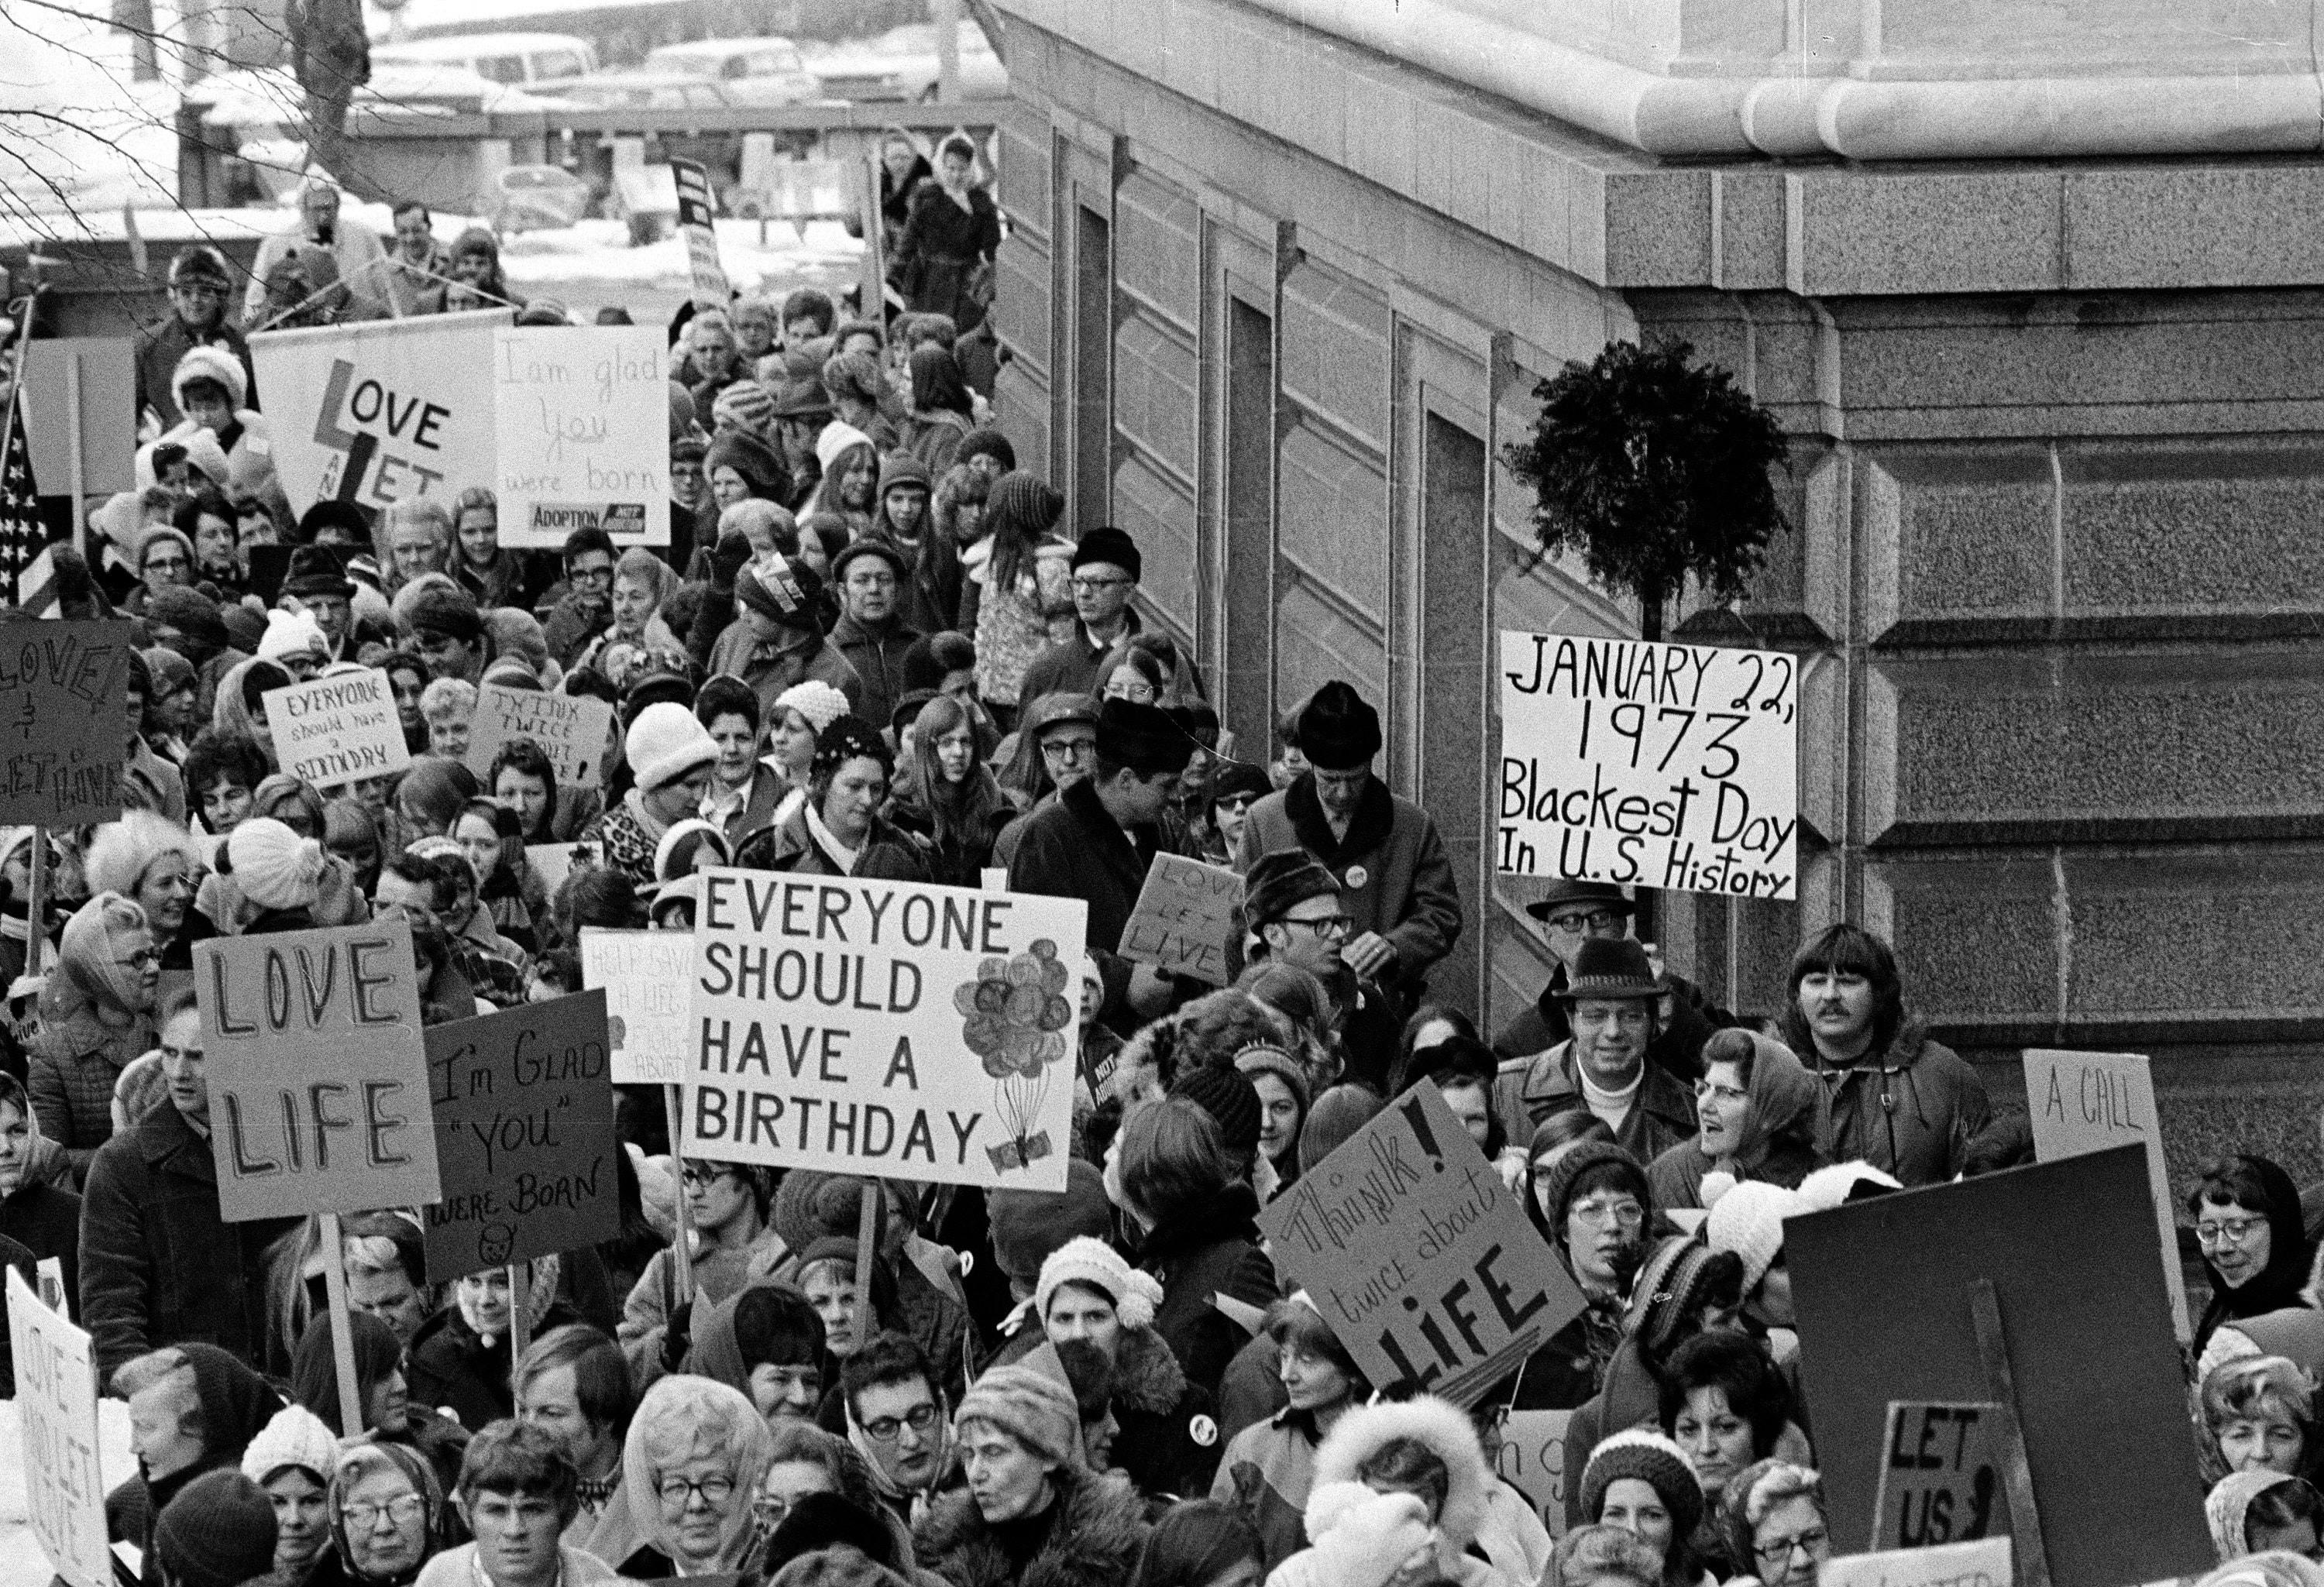 A 1973 photo shows an estimated 5,000 people, women and men, marching around the Minnesota Capitol building protesting the U.S. Supreme Court's Roe v. Wade decision. (AP Photo)